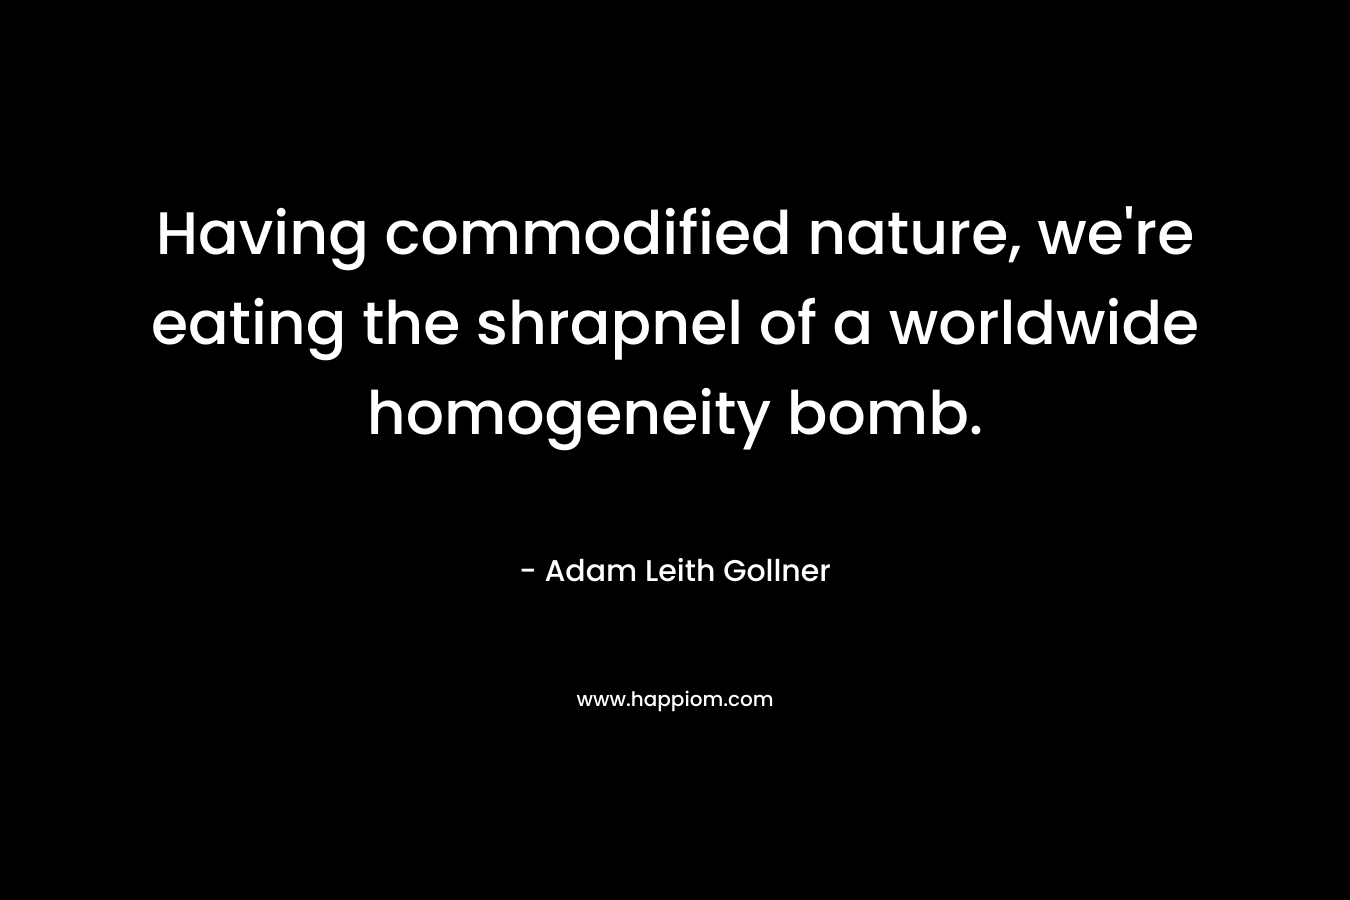 Having commodified nature, we’re eating the shrapnel of a worldwide homogeneity bomb. – Adam Leith Gollner